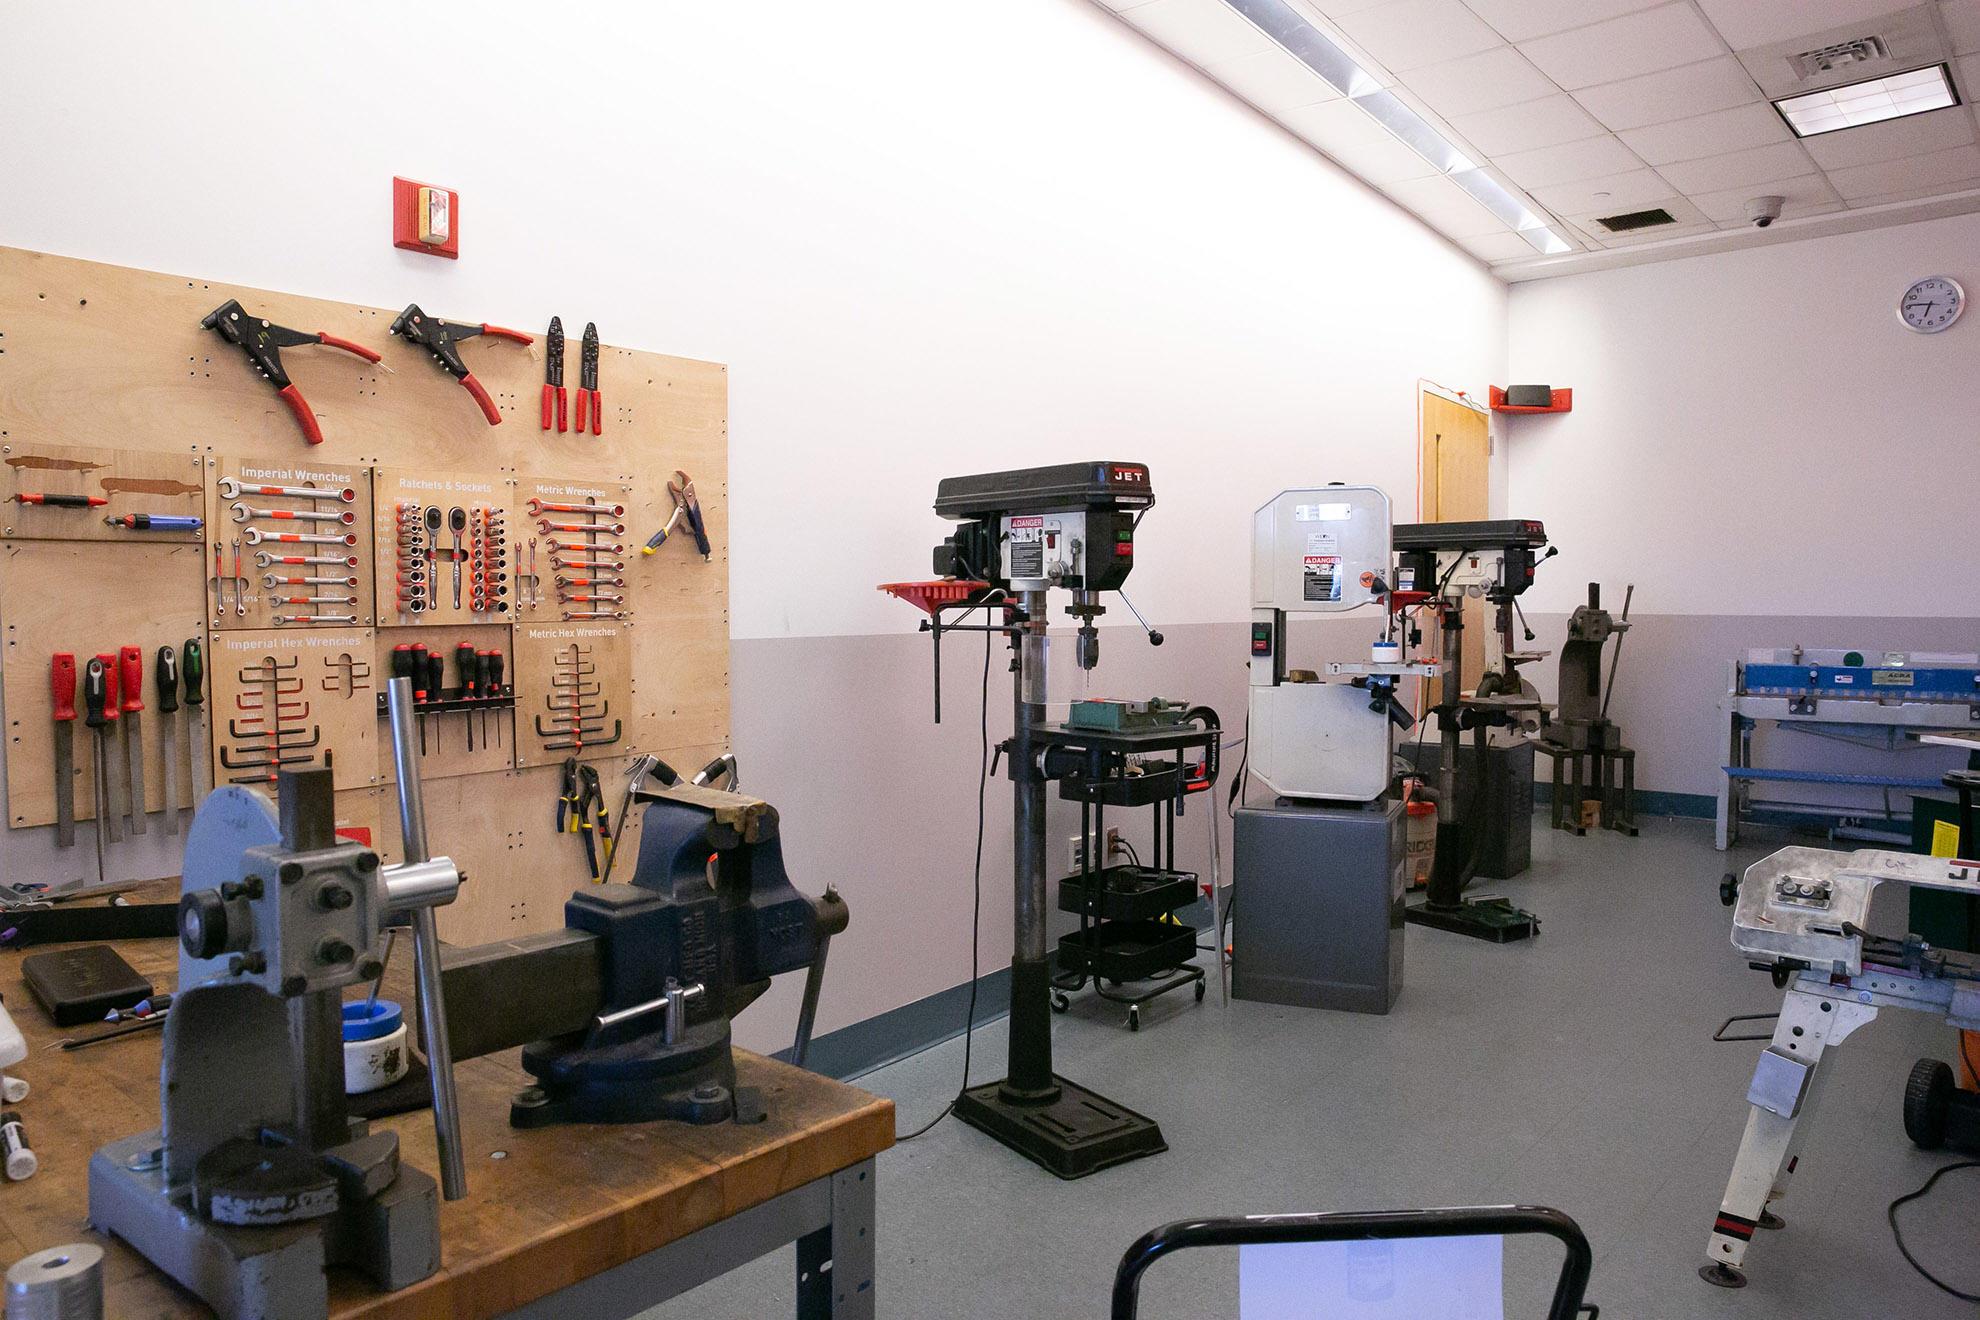 A look inside the MiniShop at Olin College